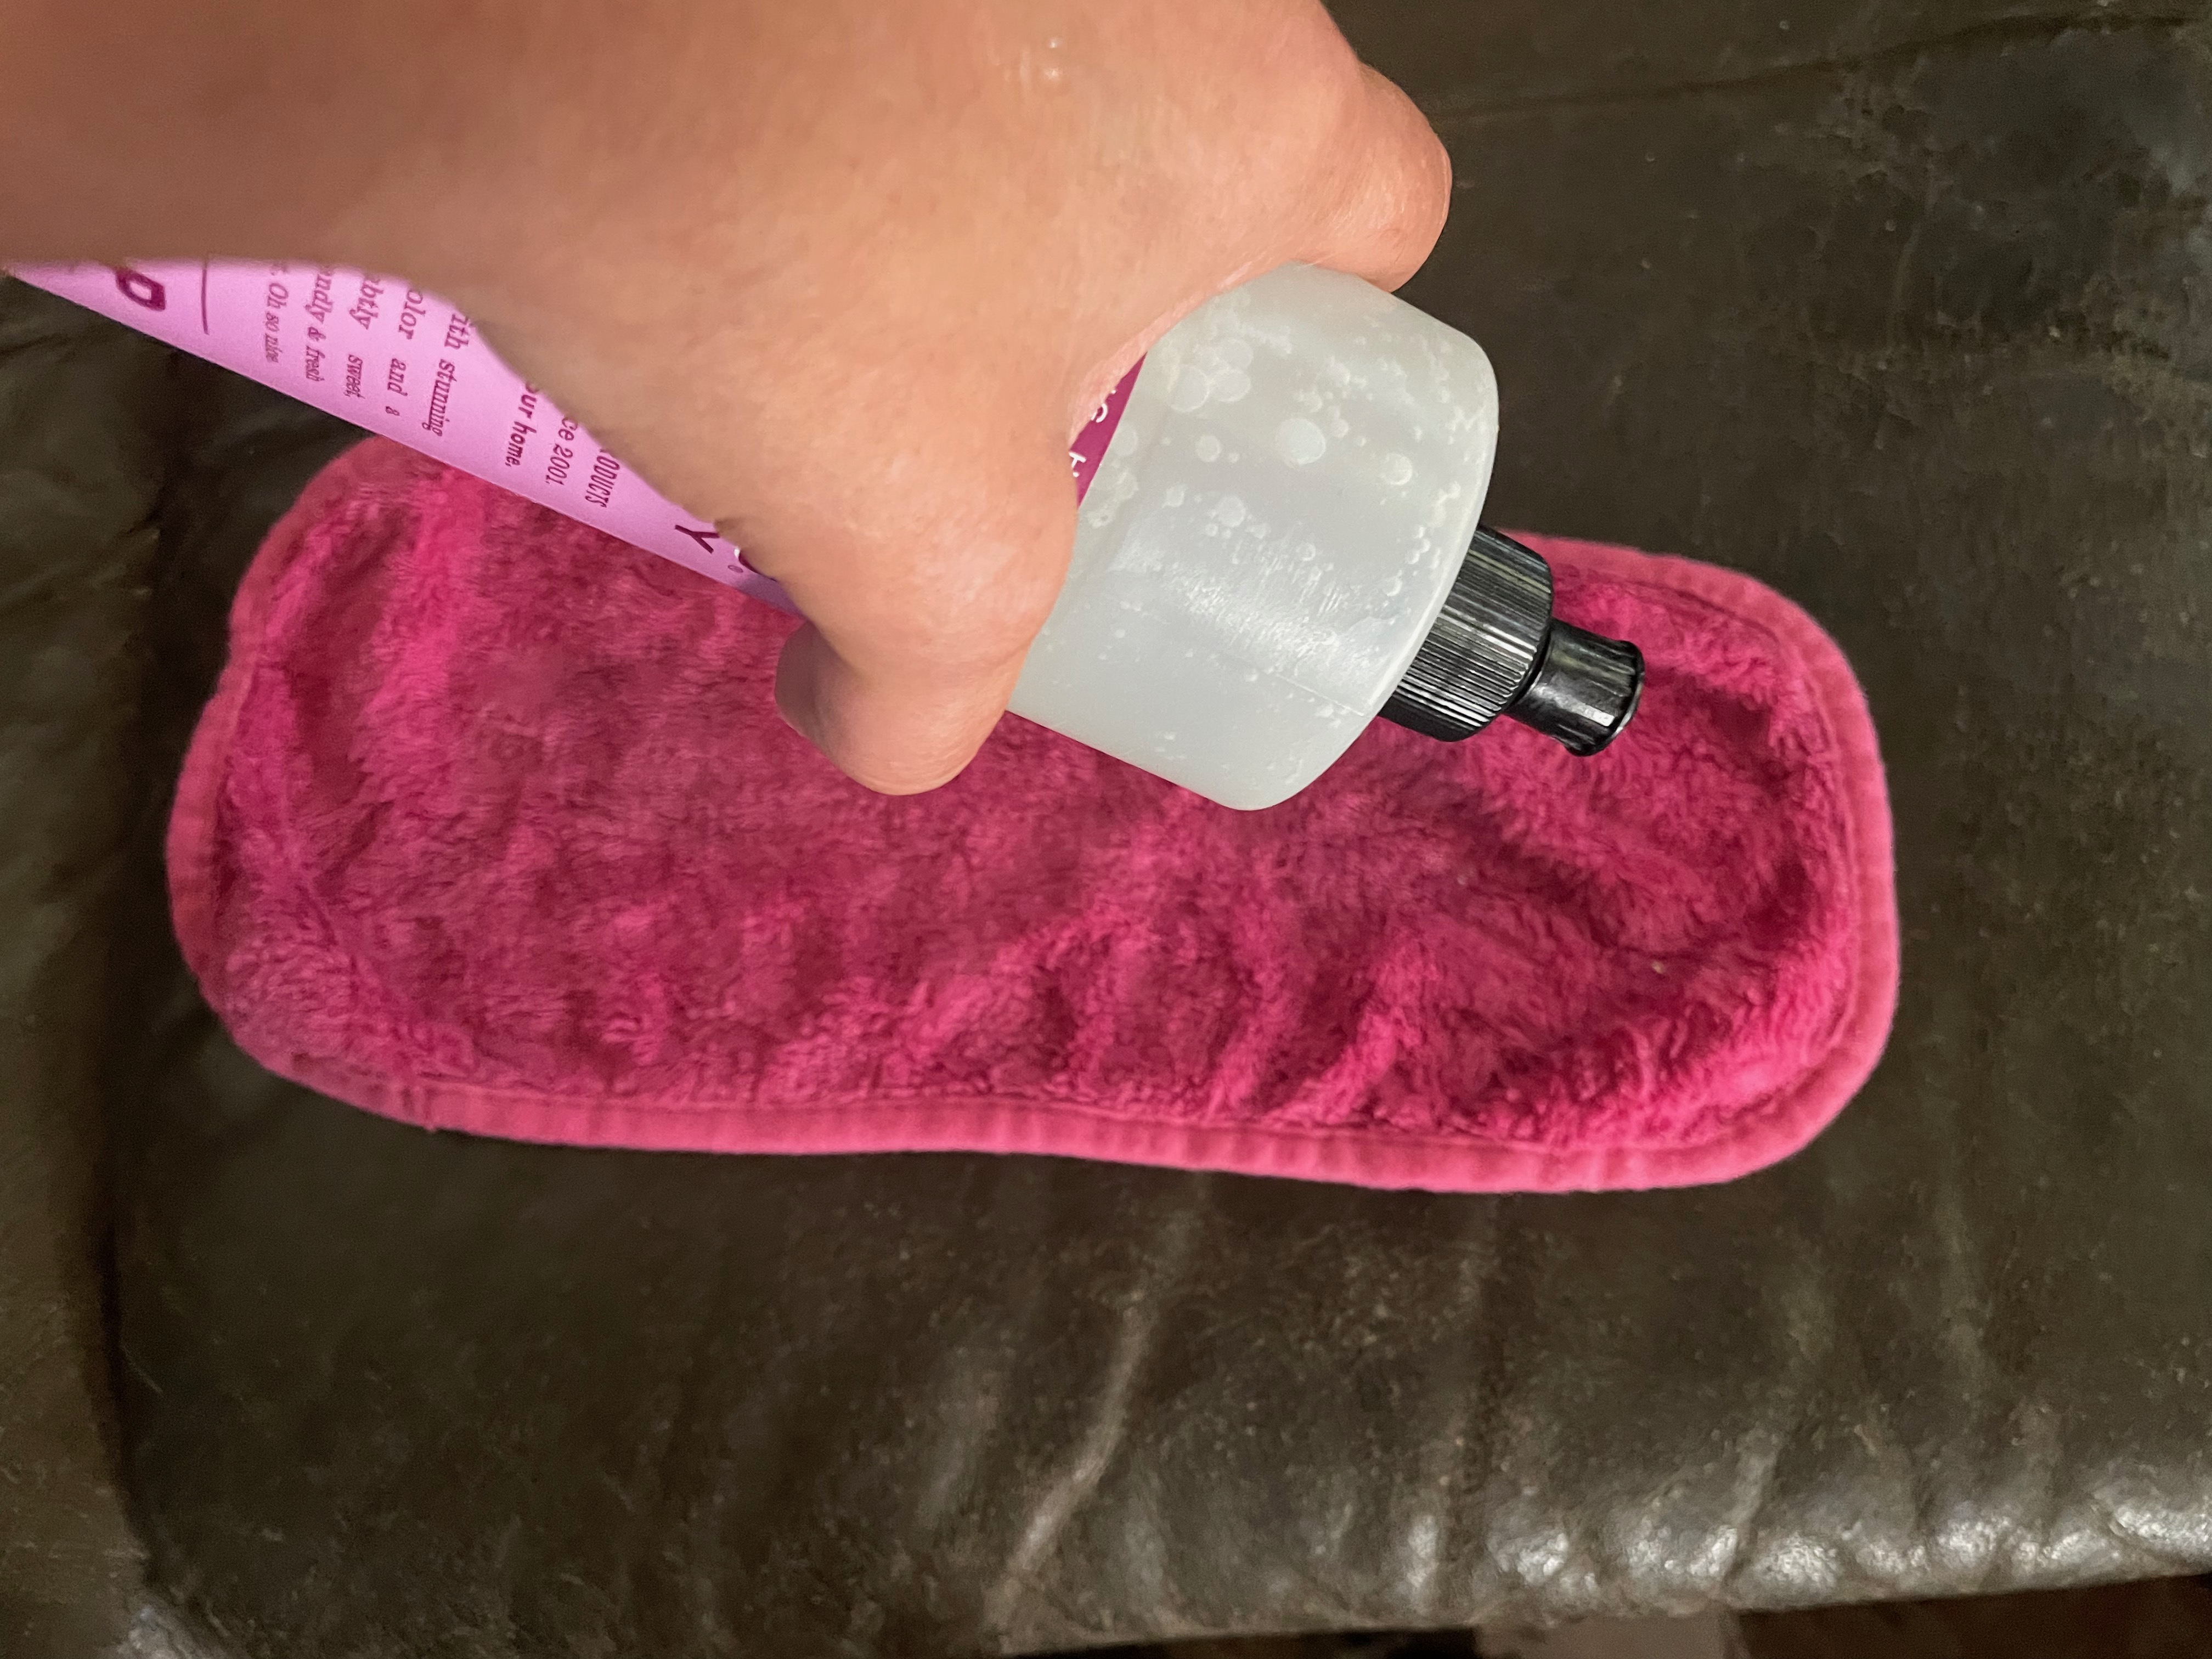 A hand adding soap to a microfiber cloth to scrub a leather couch.